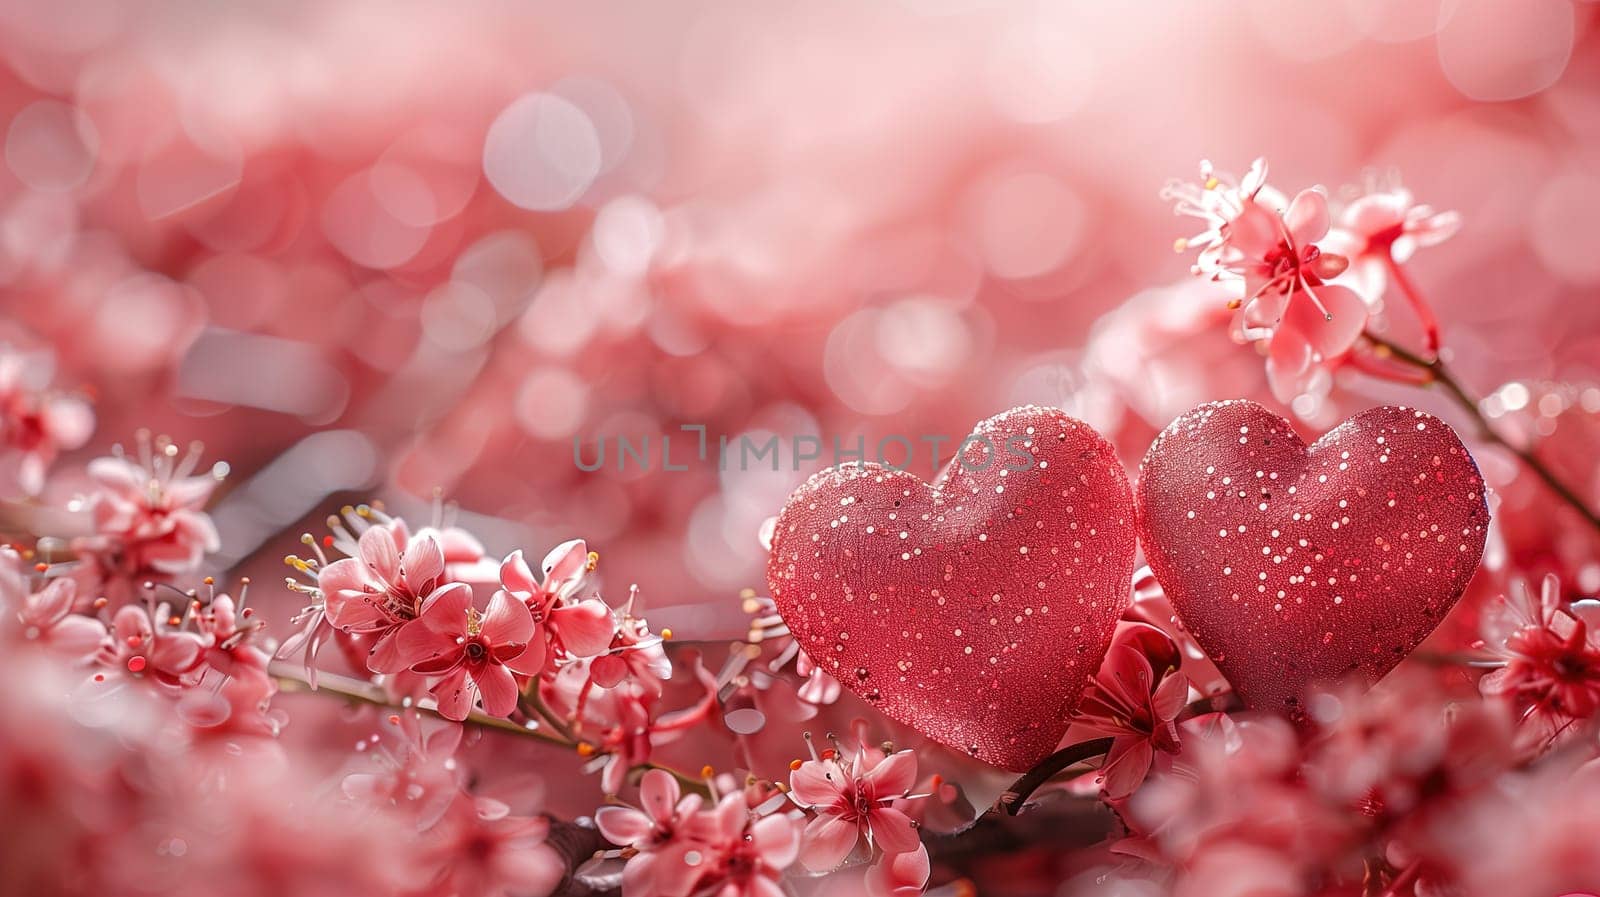 Two red hearts are perched on a tree branch, creating a striking contrast against the green leaves. The hearts stand out as they rest peacefully on the sturdy branch.